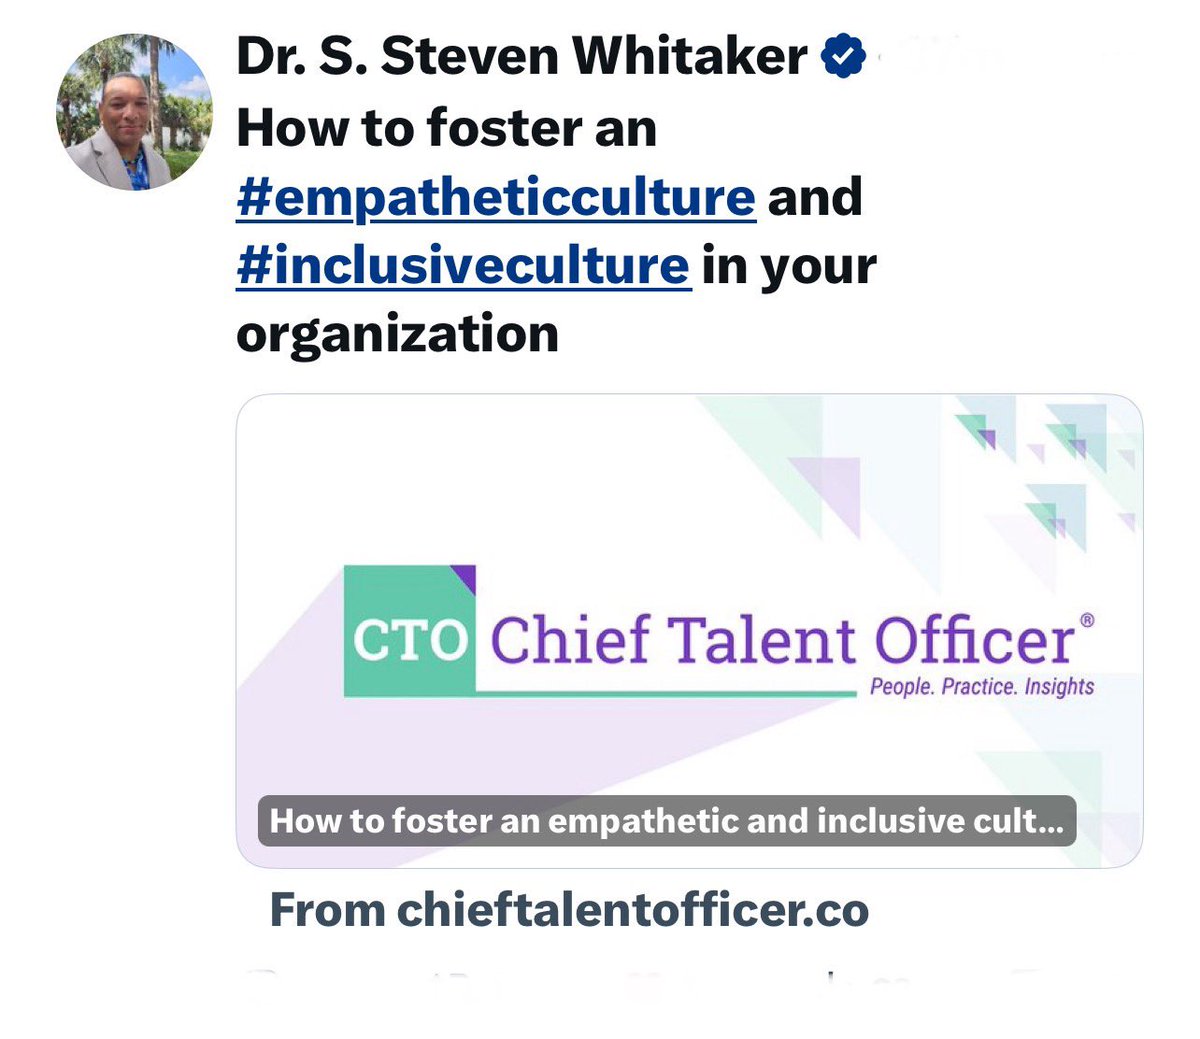 Some companies brag about their #EmpathicCulture, #InclusiveCulture, or other admirable culture that “don’t walk the #CultureTalk.” Prioritize building an ethical #CognitiveCulture within which people are nurtured to safely #think toward their better-to-#BestEffortThinking (BET).